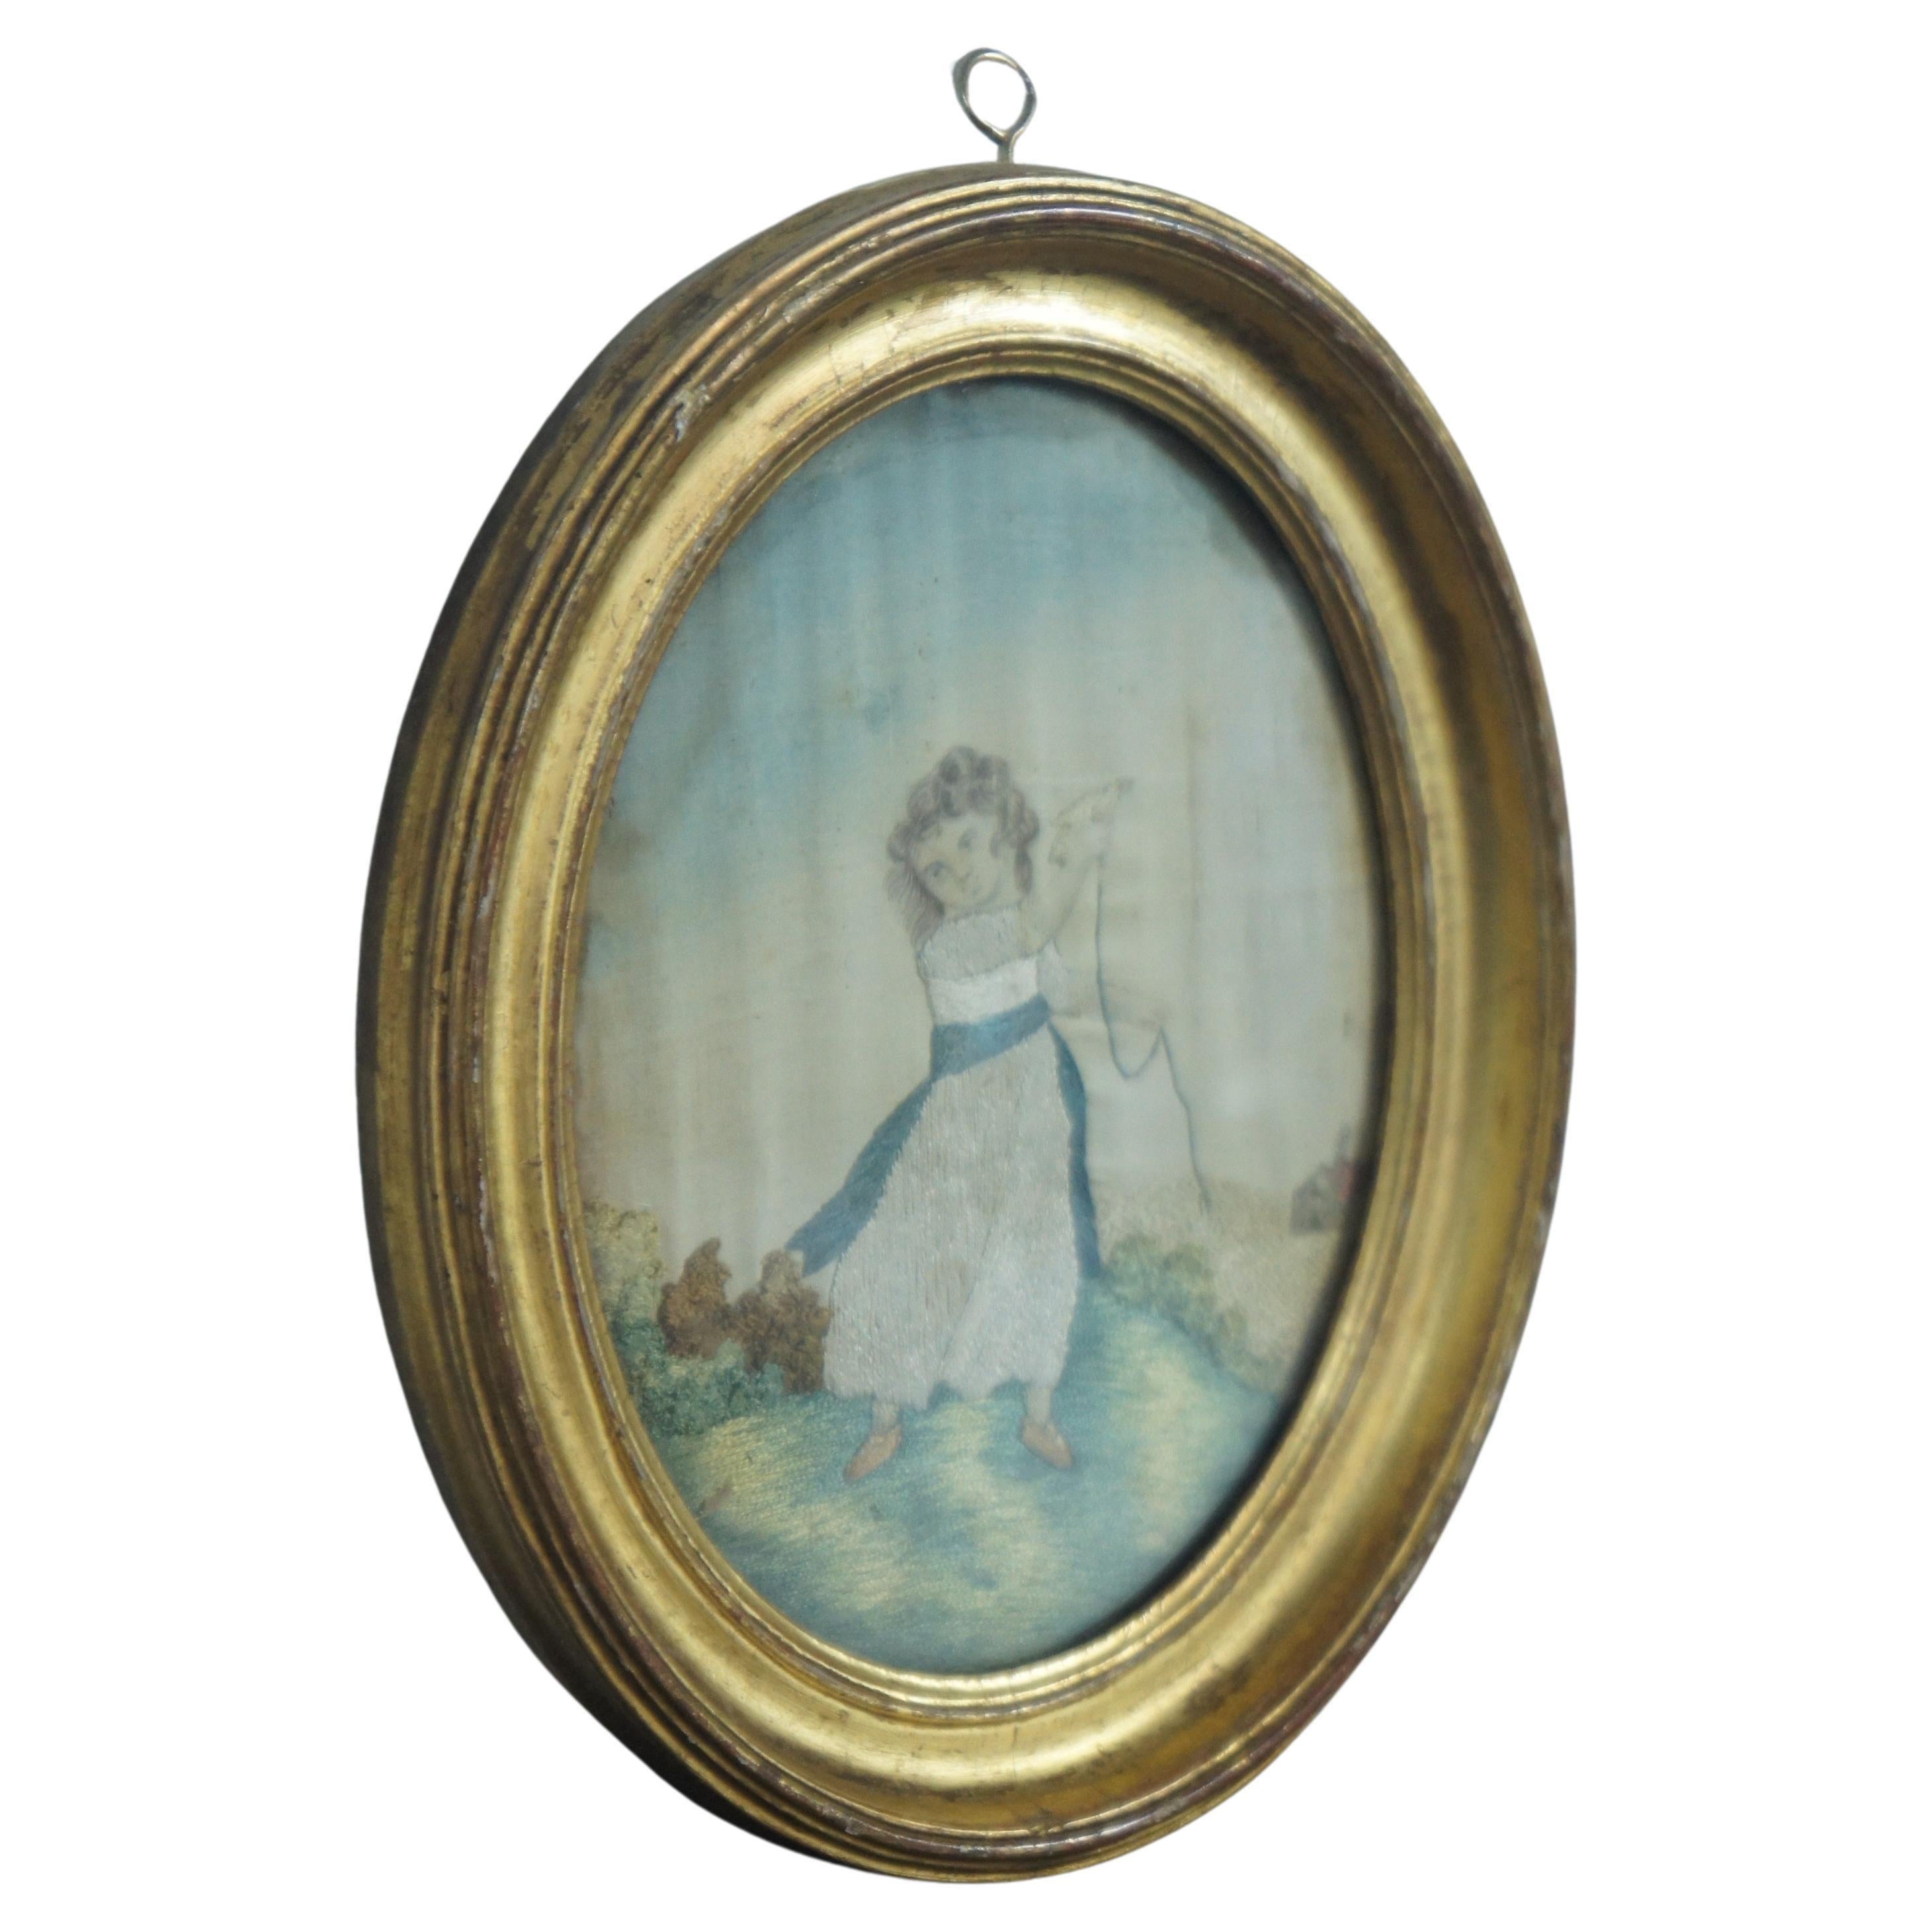 Antique French silk embroidered stumpwork picture of a young girl on a hill, holding a bird tied to a string, with a cottage in the background. Some history included along the back, but hard to read.